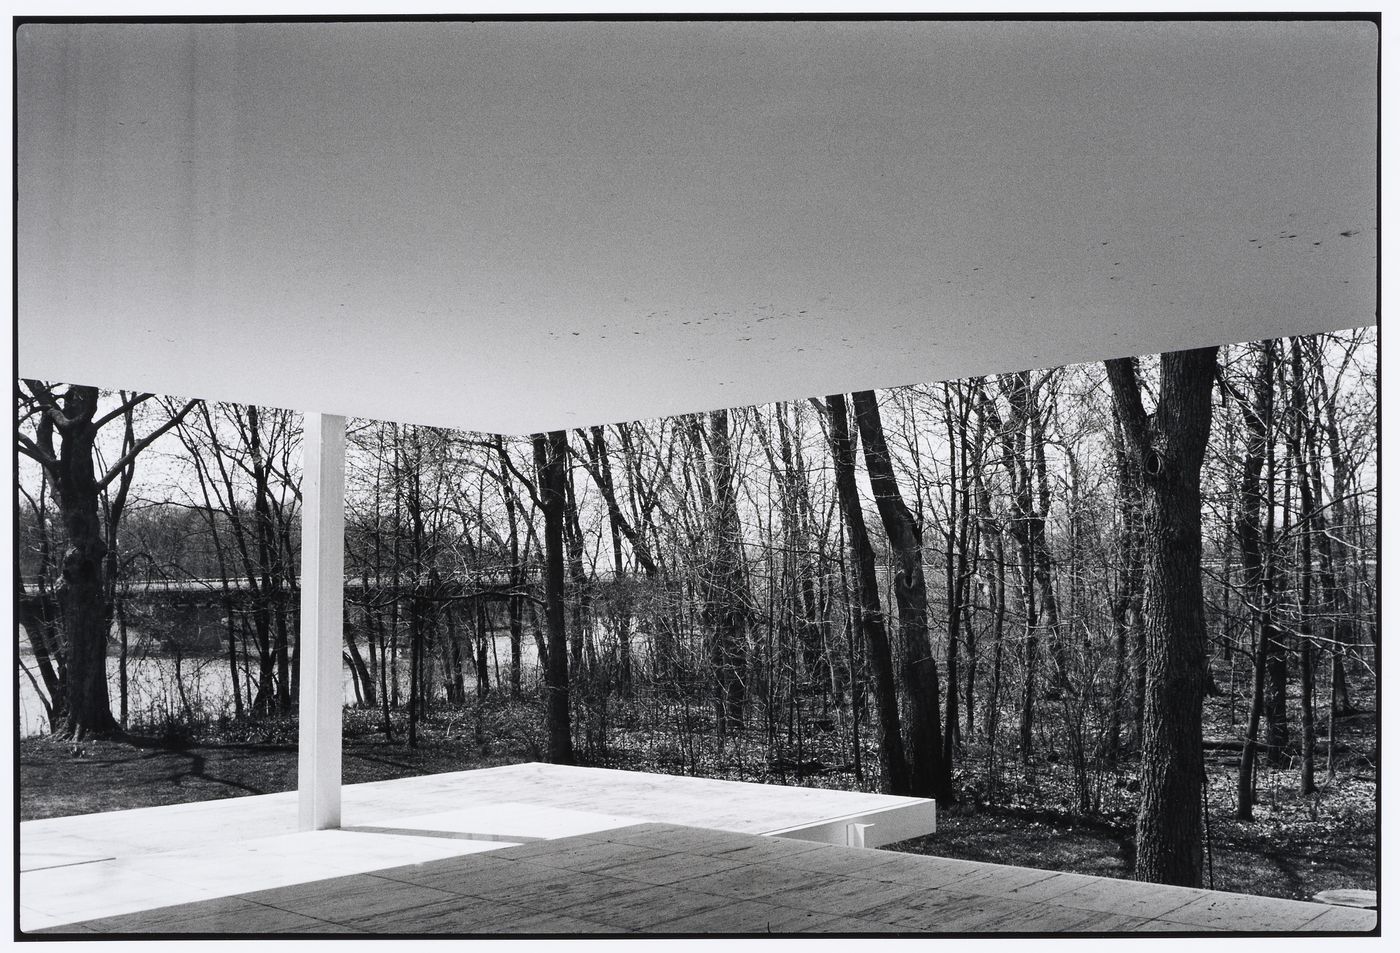 View of supporting structures of Farnsworth House with trees in background, Plano, Illinois, United States